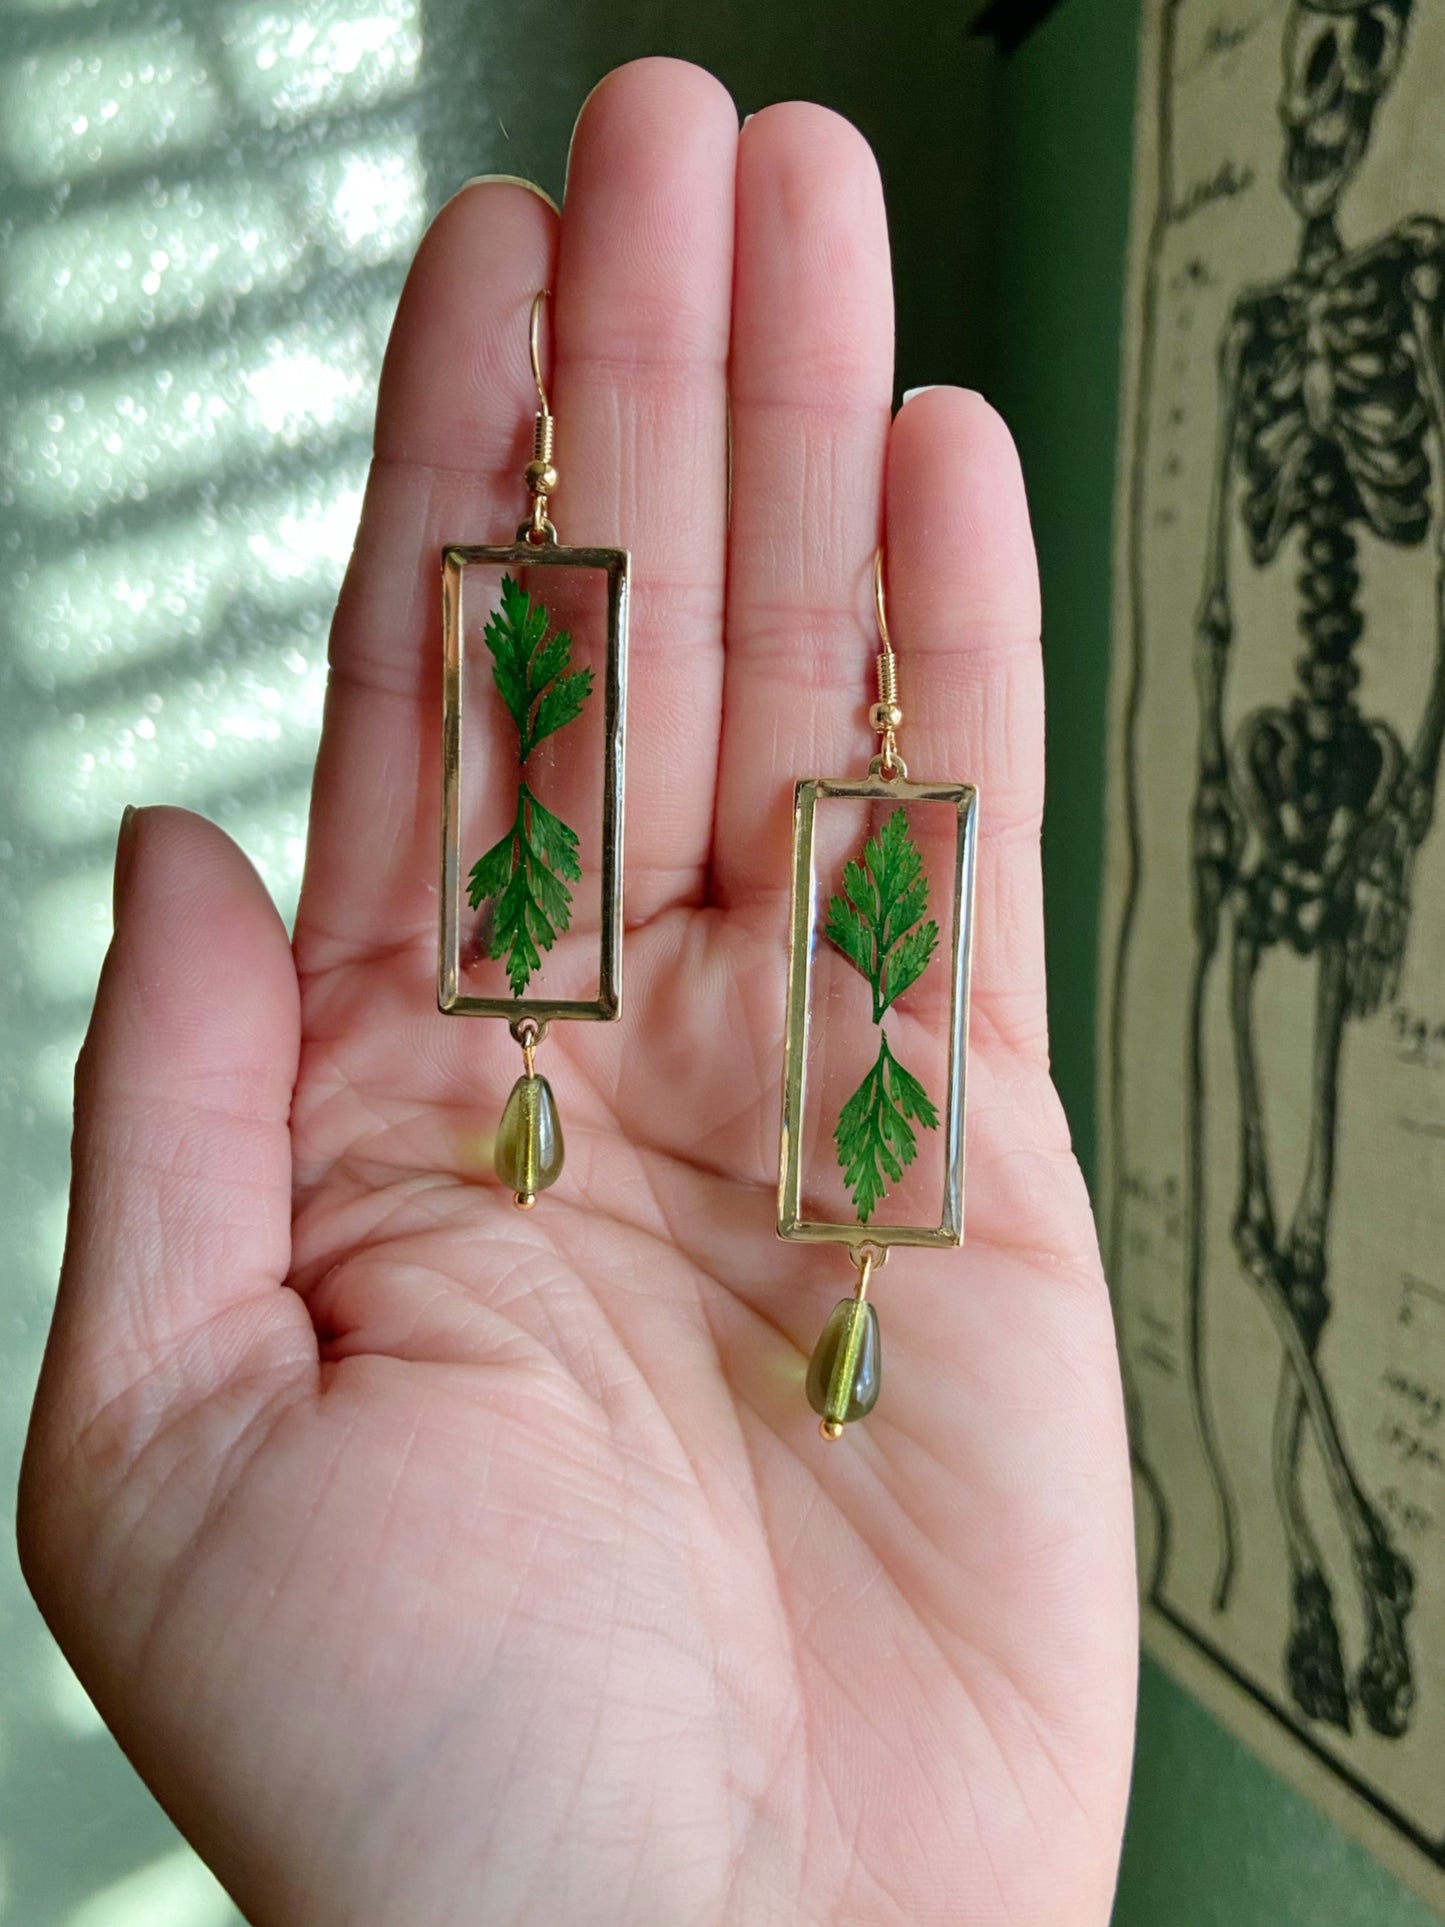 Greenery- Real pressed leaves symetrically preserved inside long open gold rectangular earrings, olive green glass drop bead